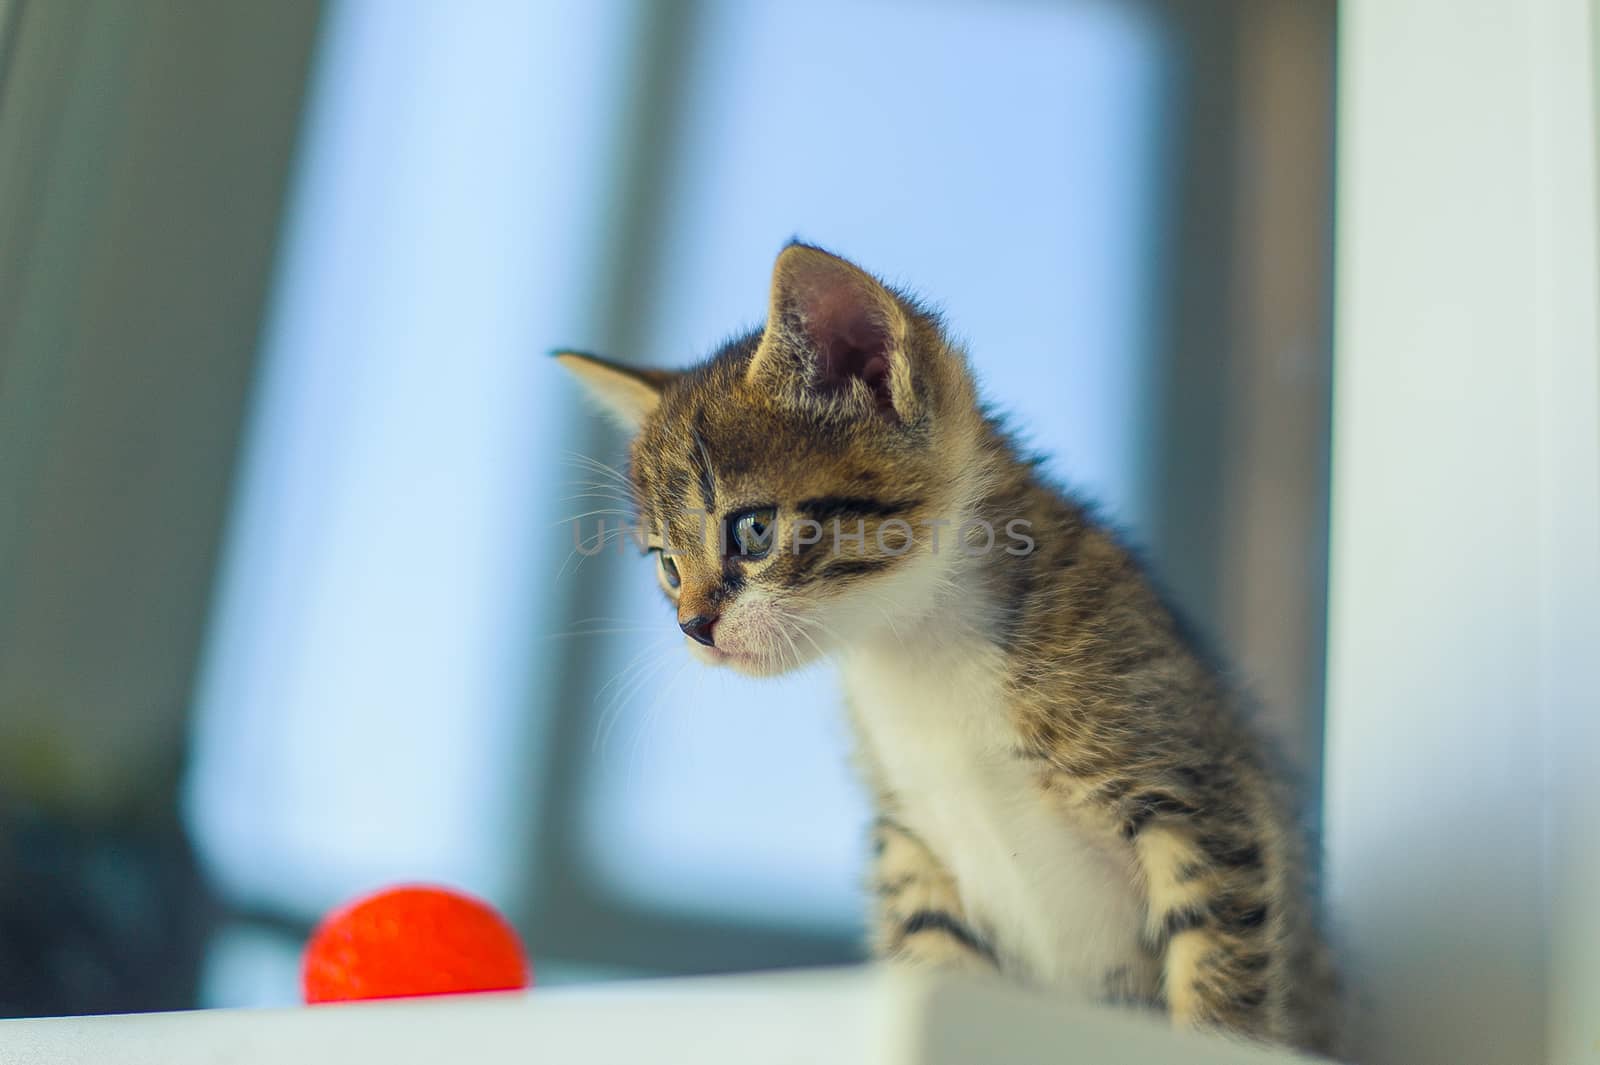 a kitten with a white breast sits on a white windowsill near a red ball by chernobrovin